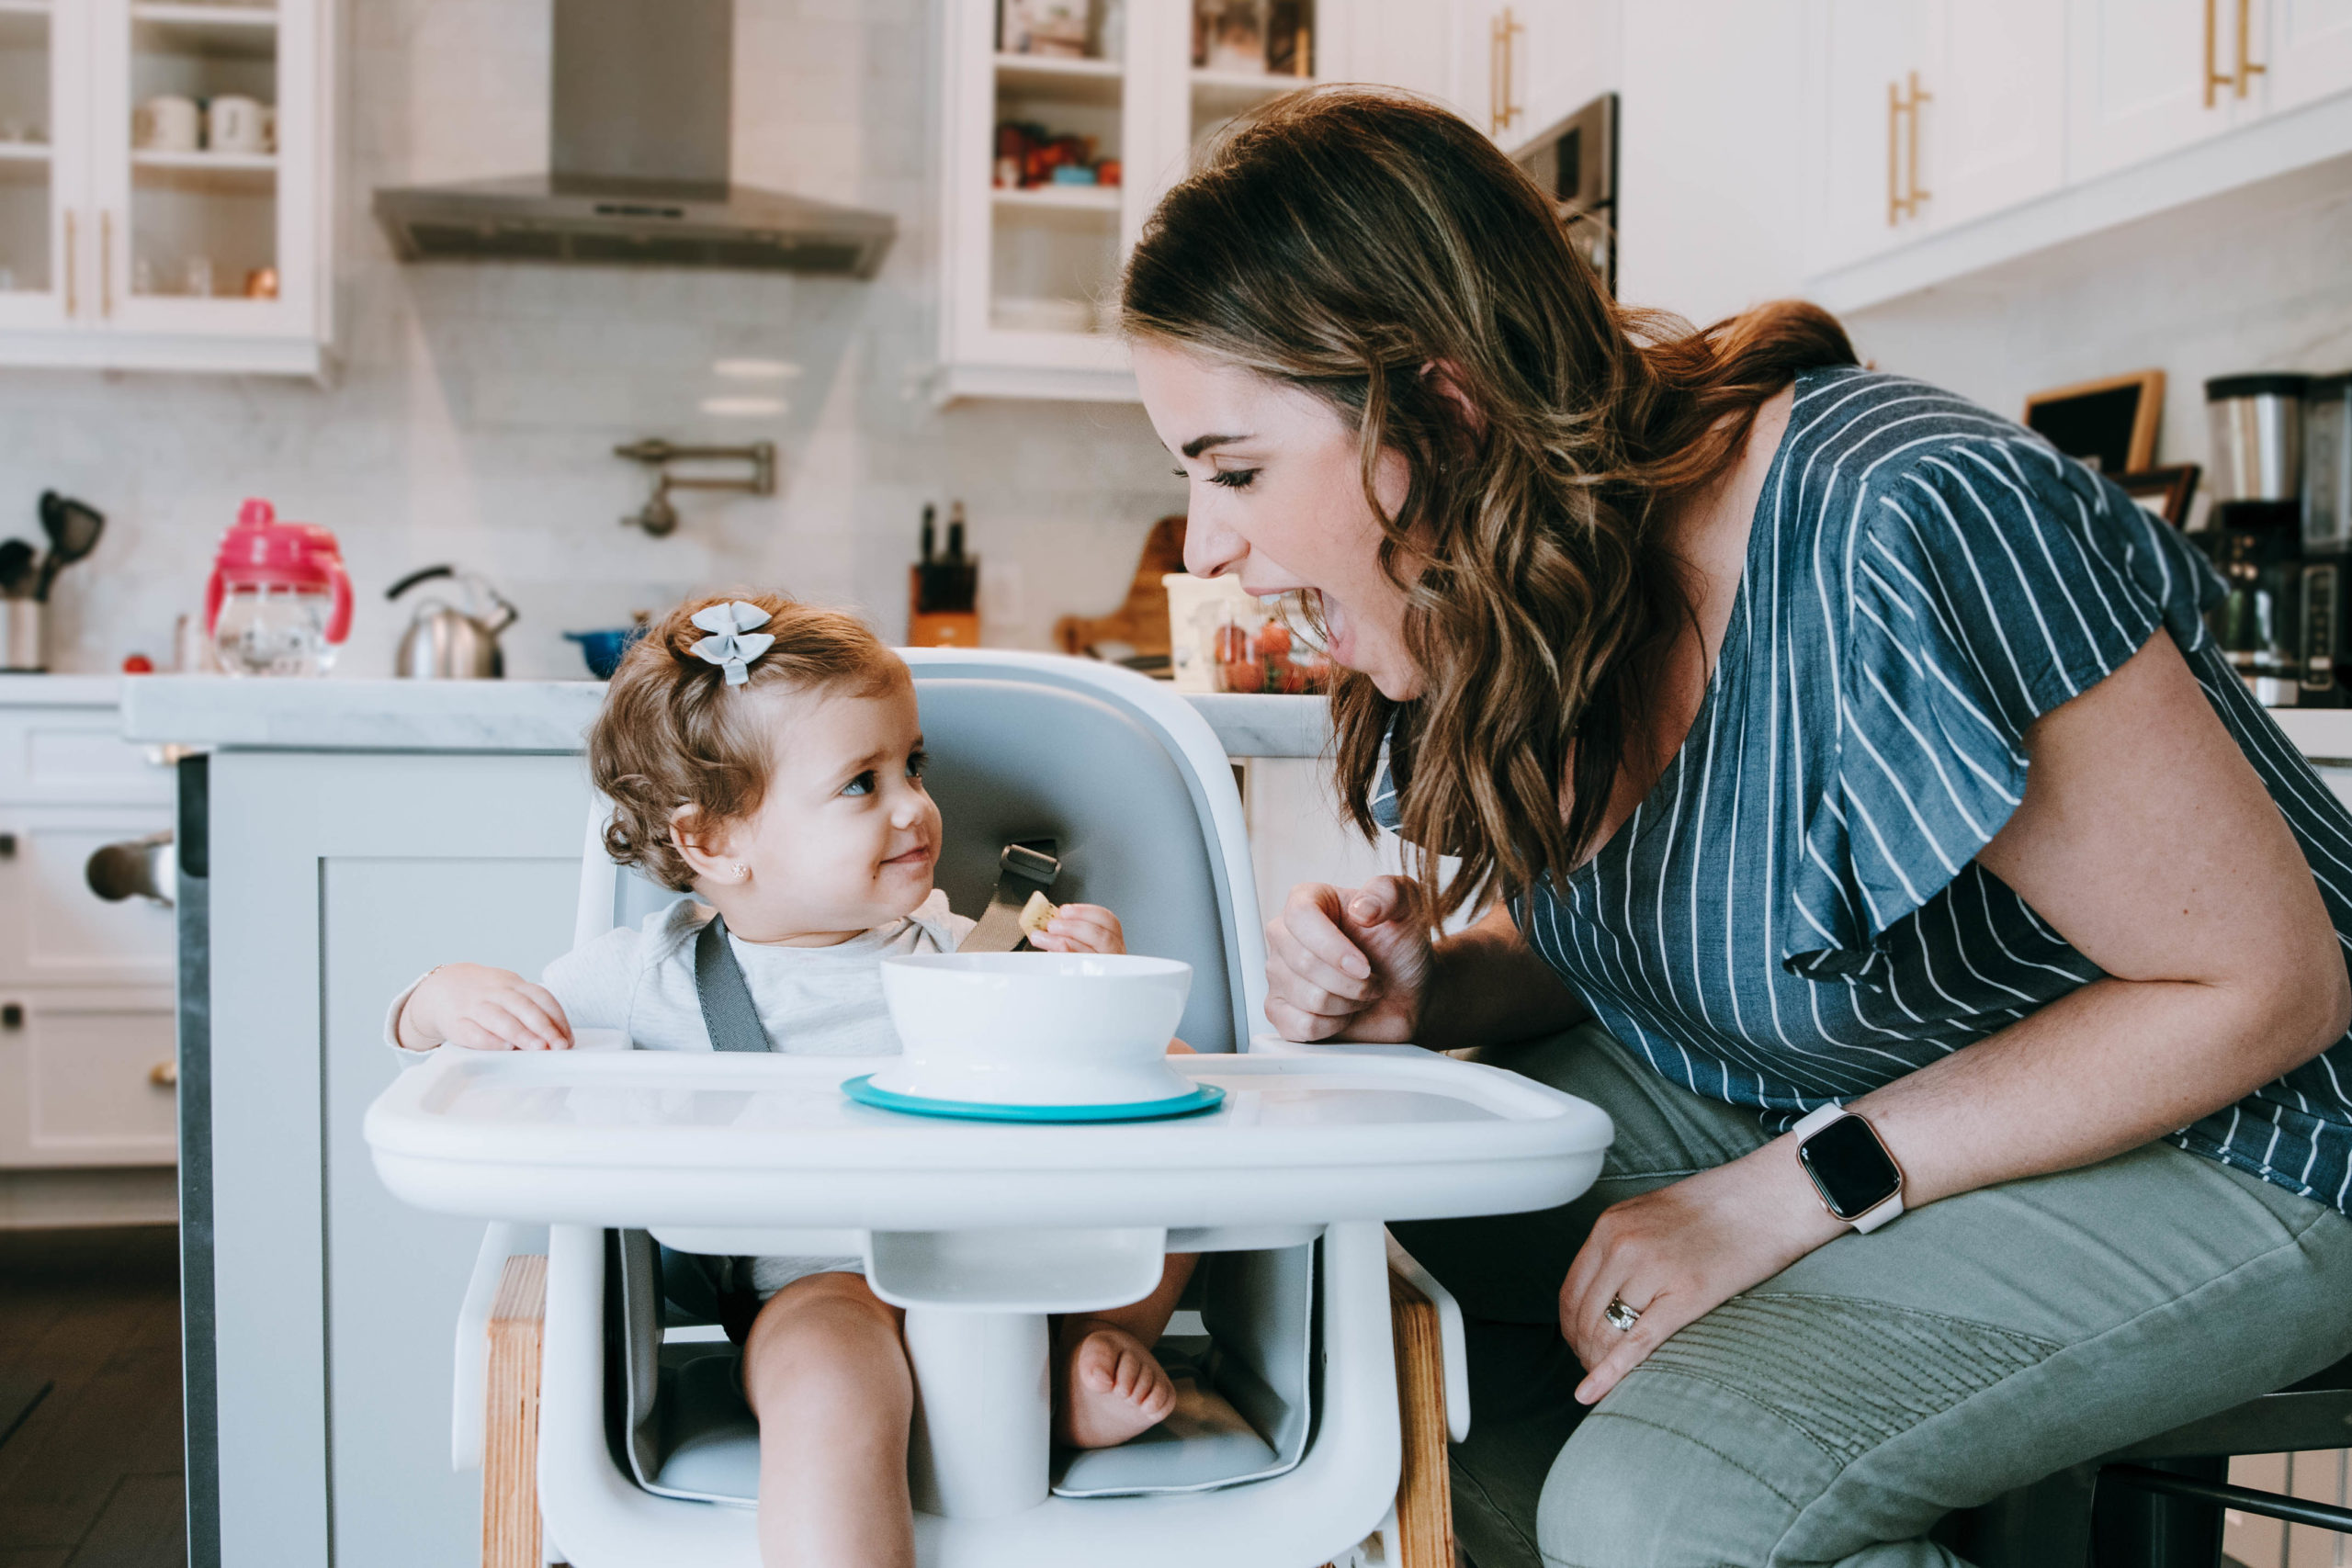 https://www.mother.ly/wp-content/uploads/2019/04/10-positive-parenting-techniques-when-your-kid-is-a-picky-eater-featured-scaled.jpg